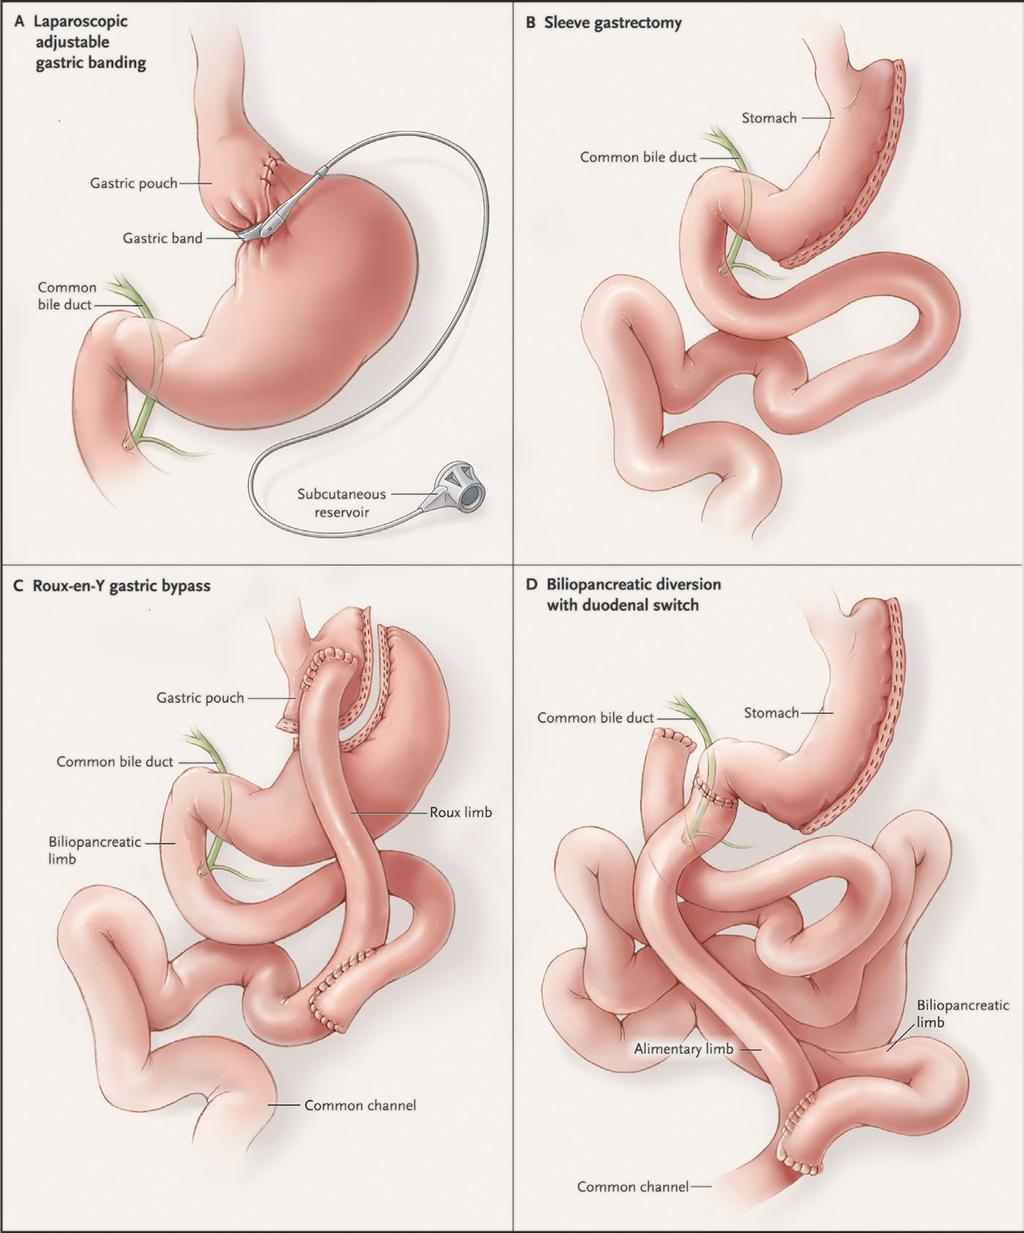 Fig. 1. procedures. Restrictive procedures include laparoscopic adjustable gastric banding (A) and sleeve gastrectomy (B).